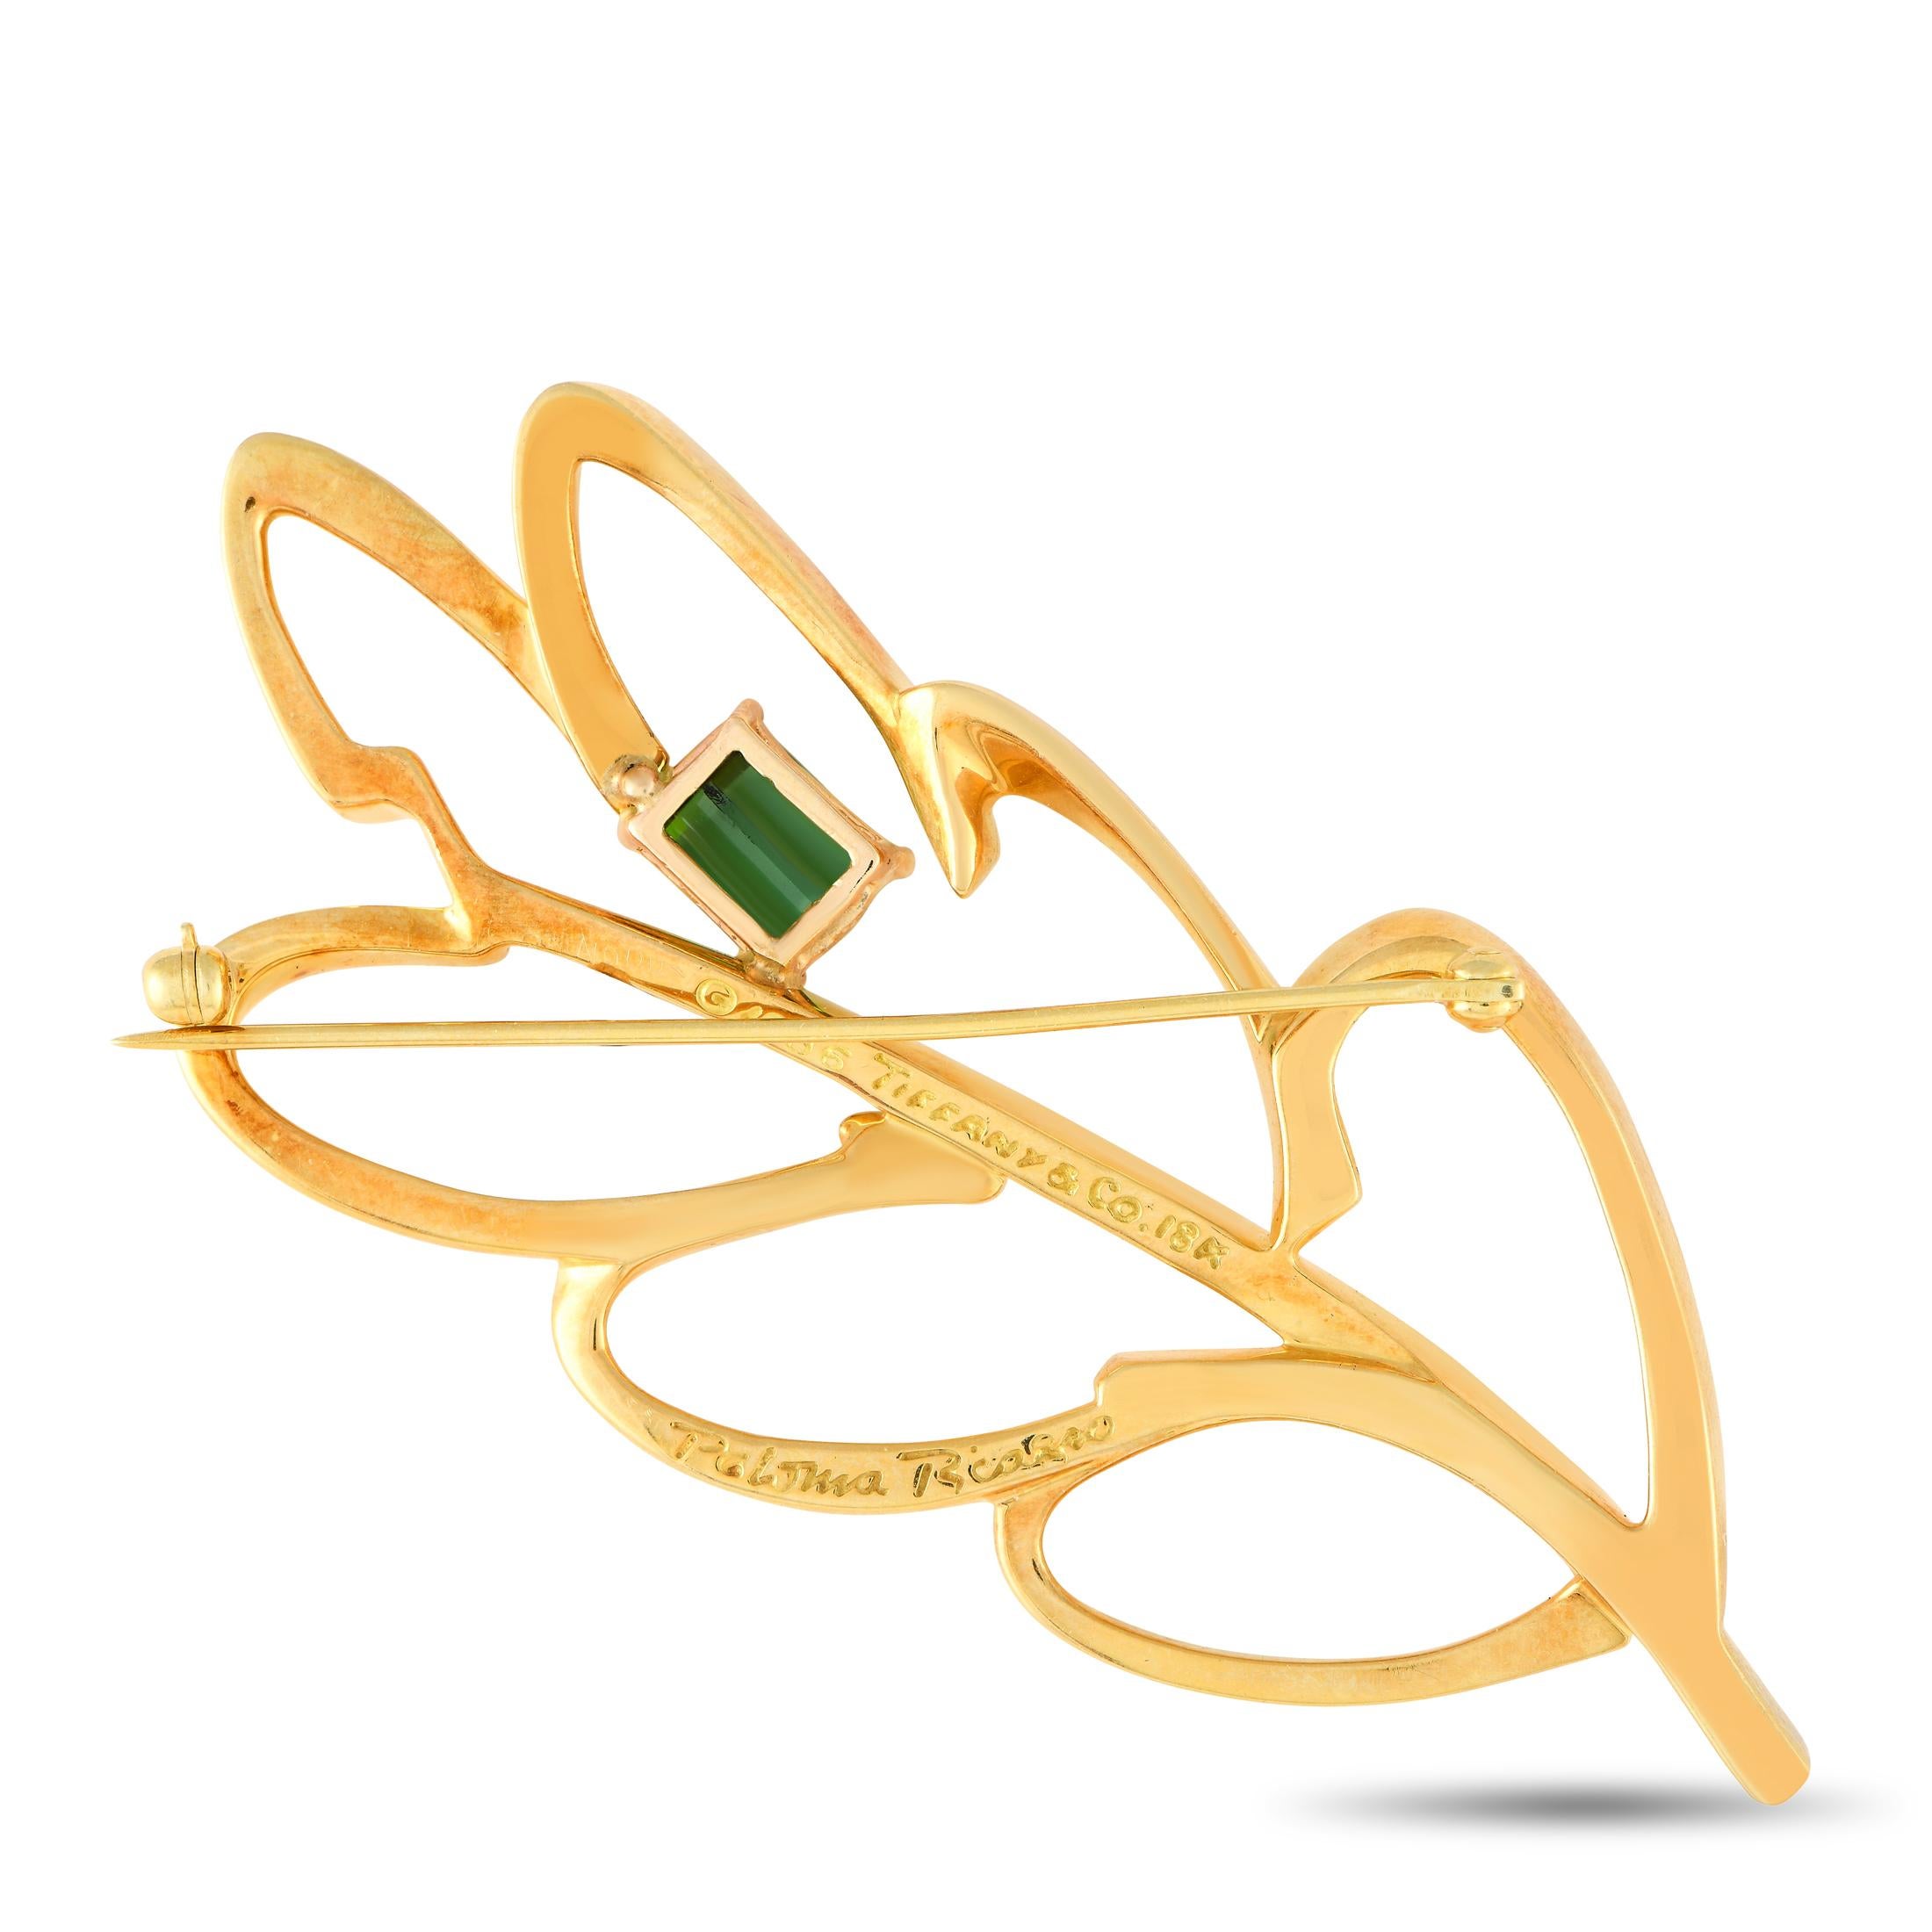 This Tiffany & Co. Paloma Picasso brooch is ideal for anyone with a minimalist aesthetic. Sleek and delicate, the leaf-shaped design is crafted from 18K yellow gold and includes a single tourmaline gemstone accent. It measures 2.25” long by 2.25”